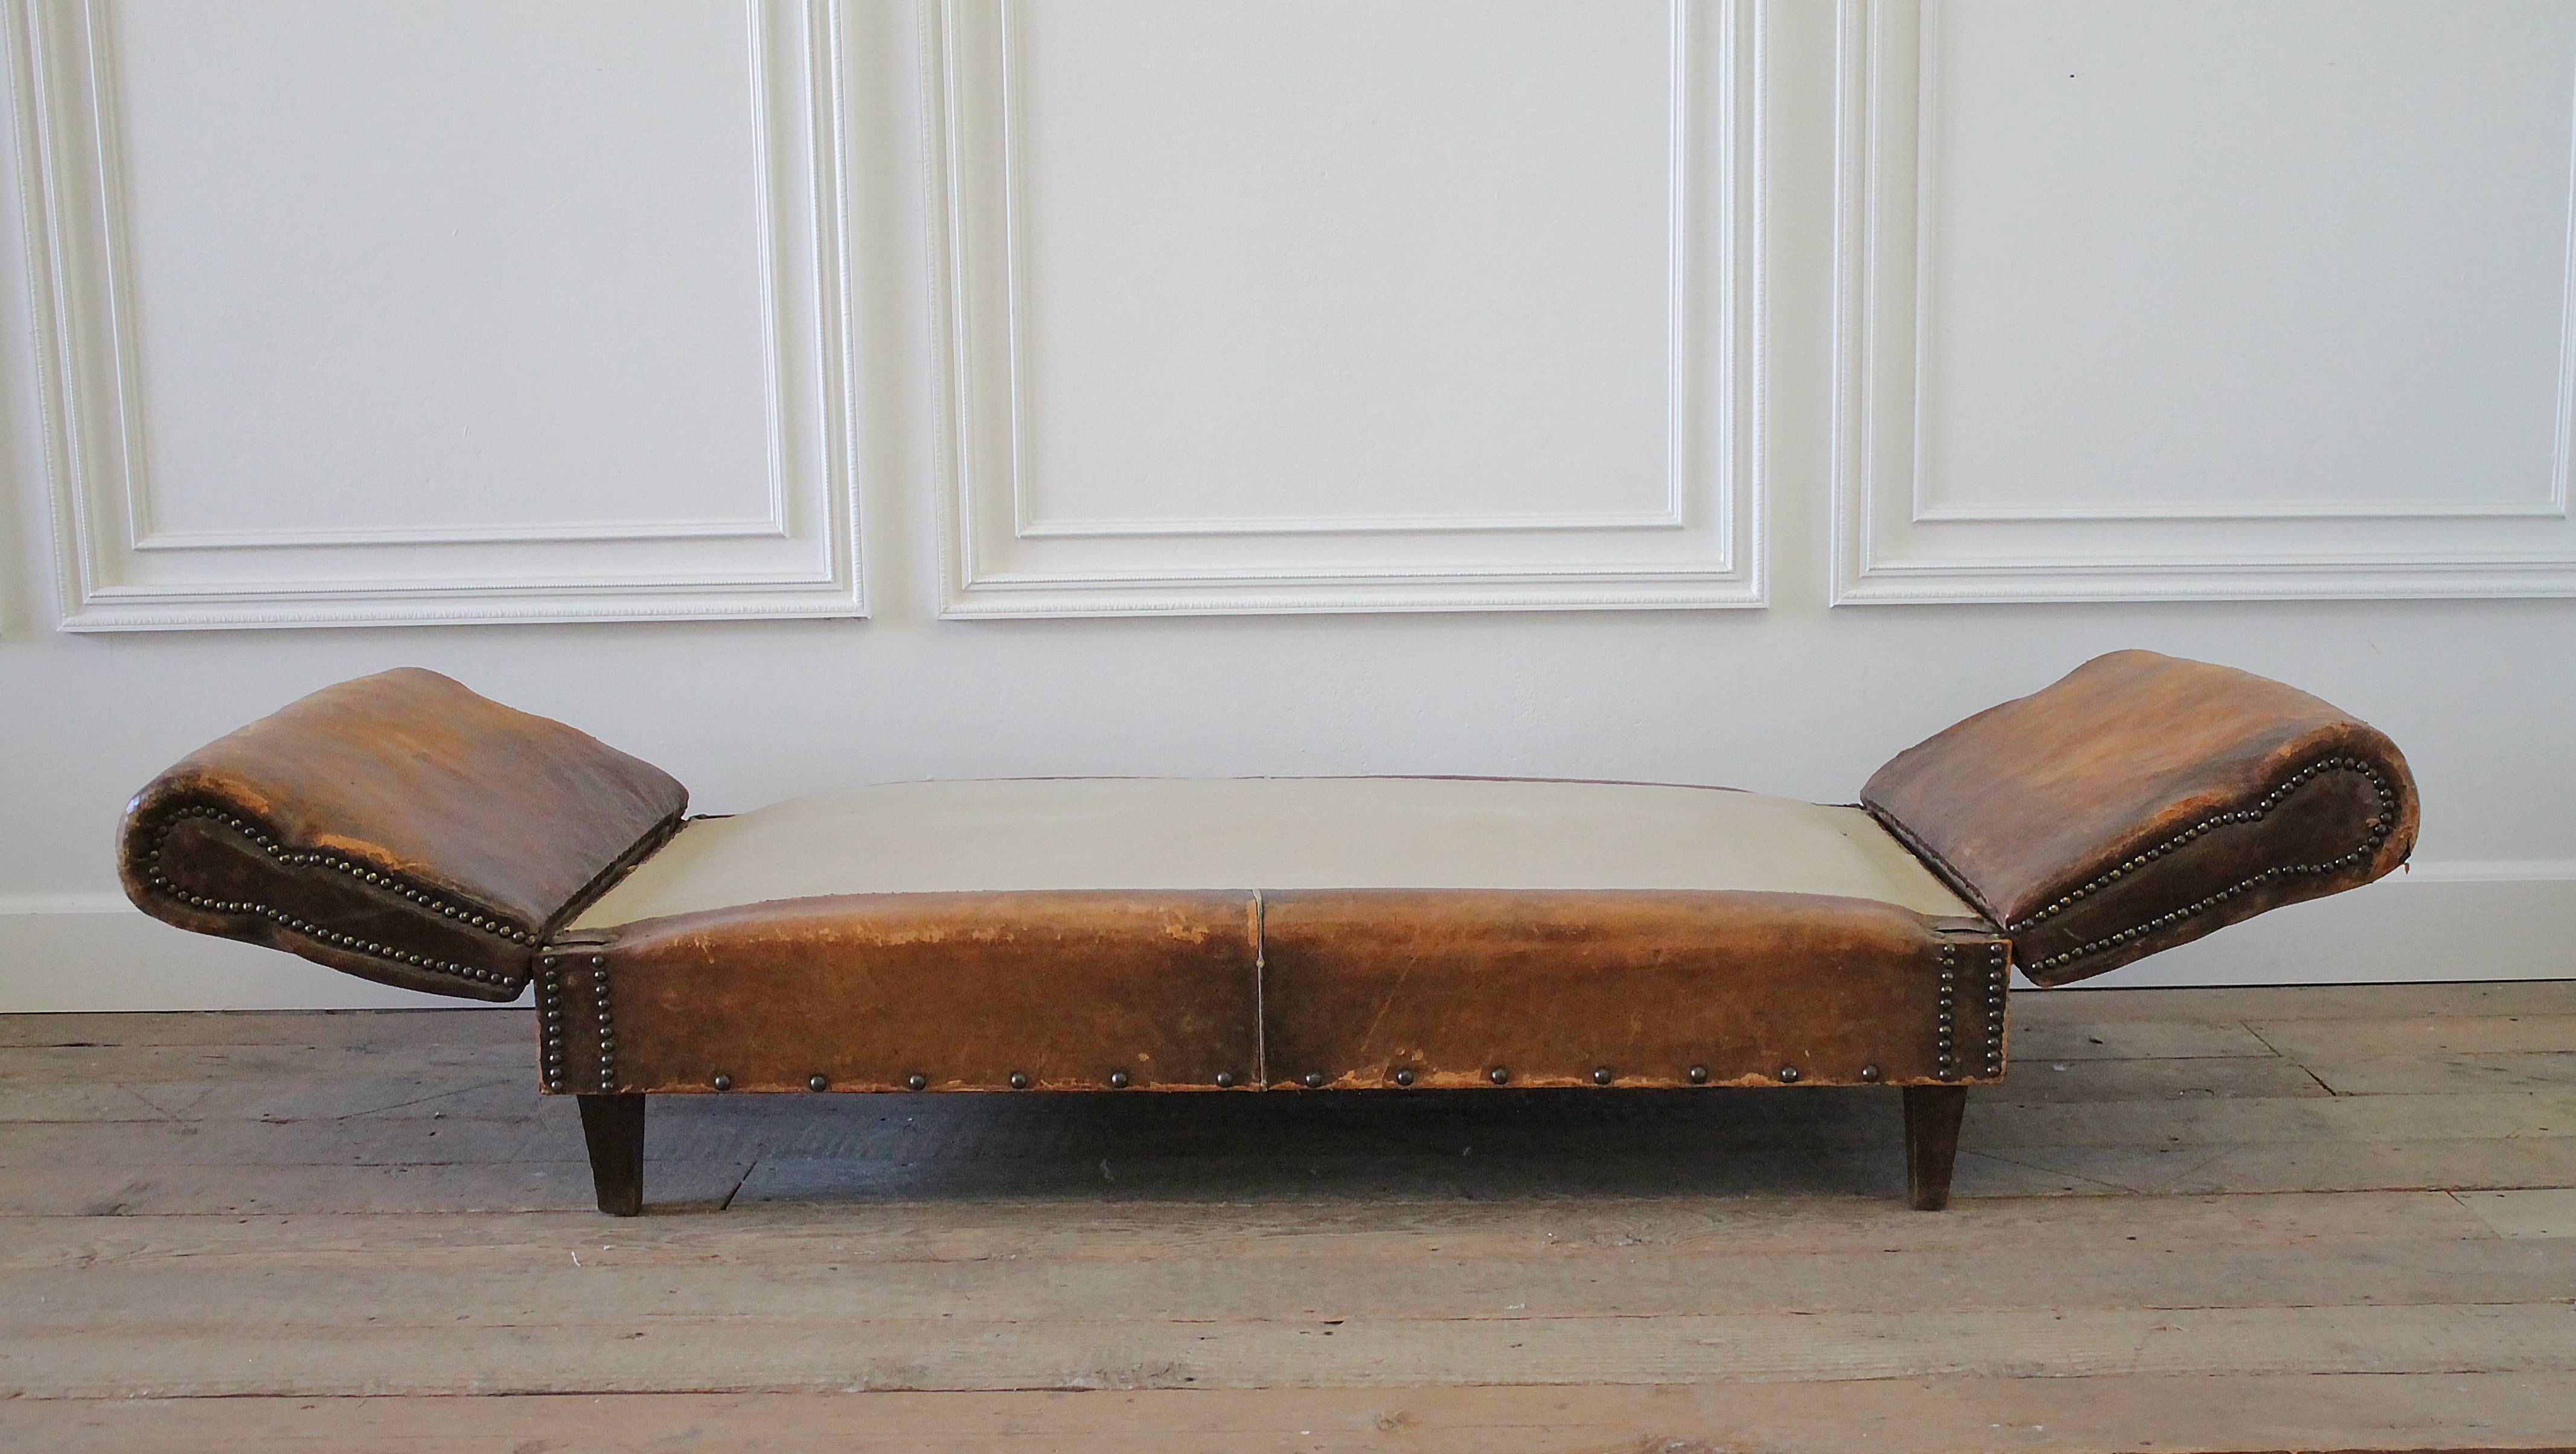 20th Century Antique French Leather Drop Arm Daybed Sofa with French Mattress Ticking